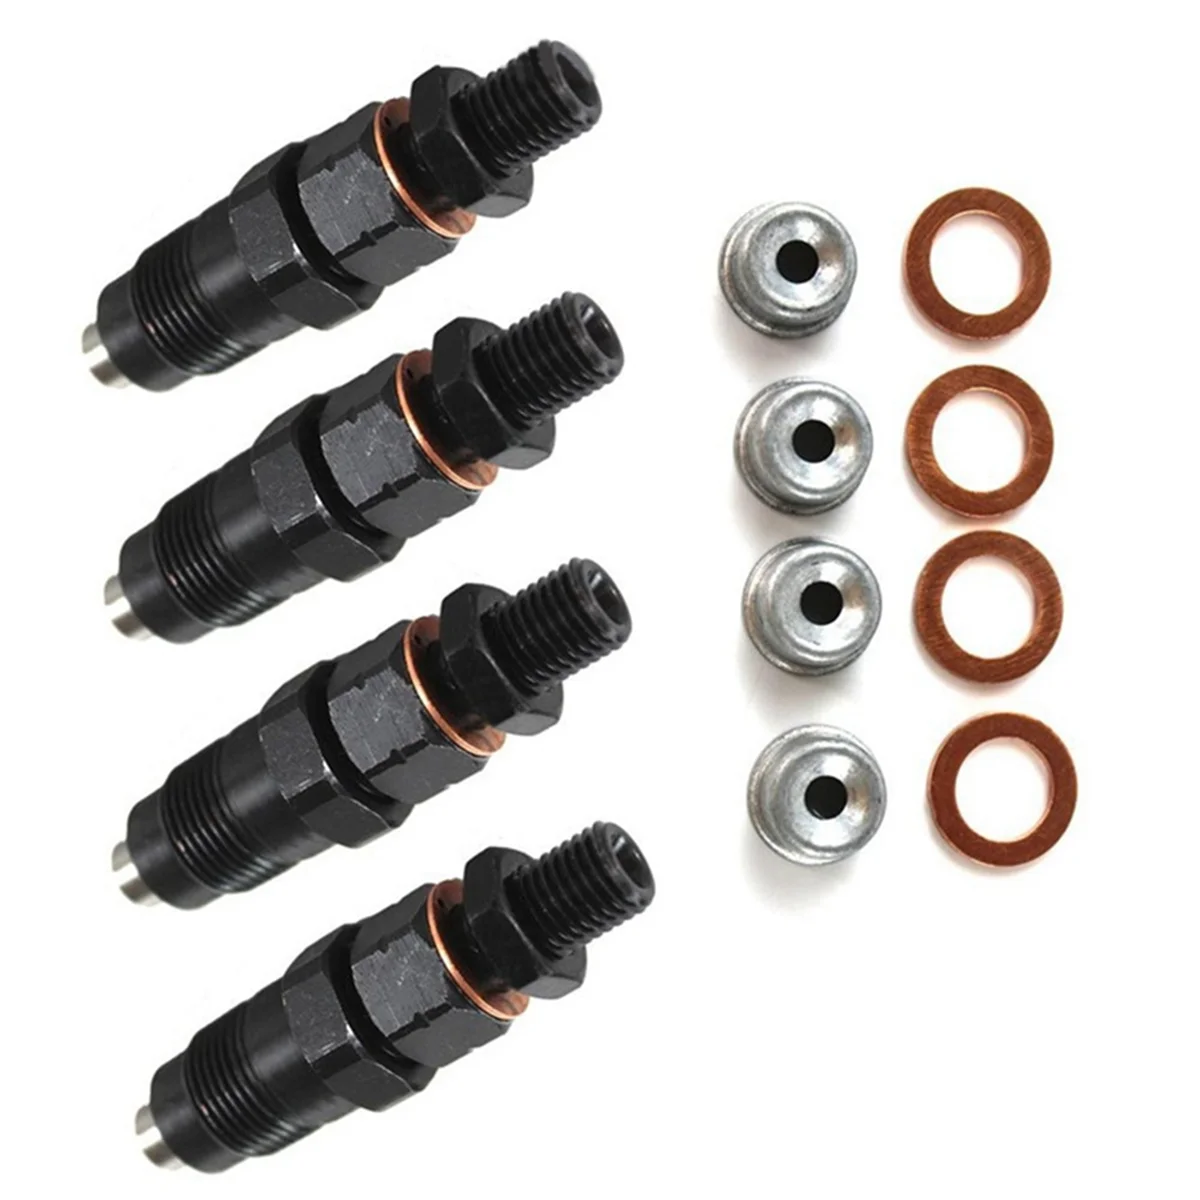 Car Engine Parts Fuel Injector for Perkins Engines Case Skid Steer Fuel Injector Nozzle 404-22T 104-22 403D-15 131406490